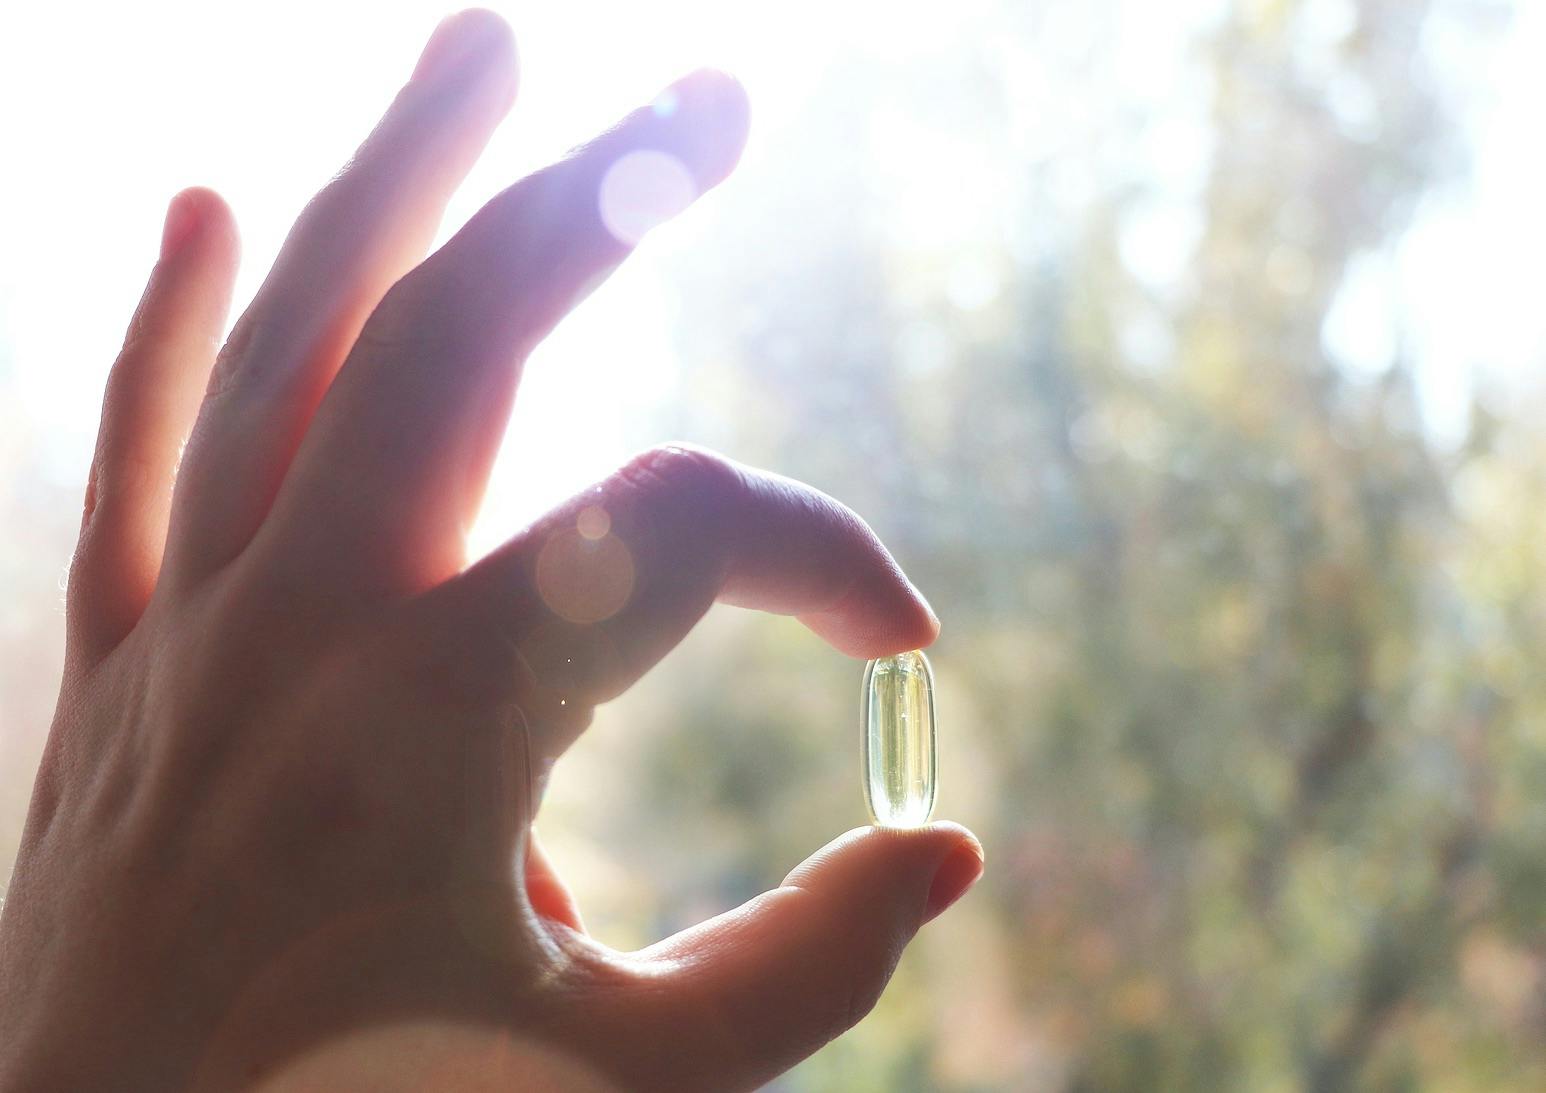 Vitamin D or omega 3 capsules. Vitamin gel in hand against the window. The concept of a lack of vitamin D in the body
